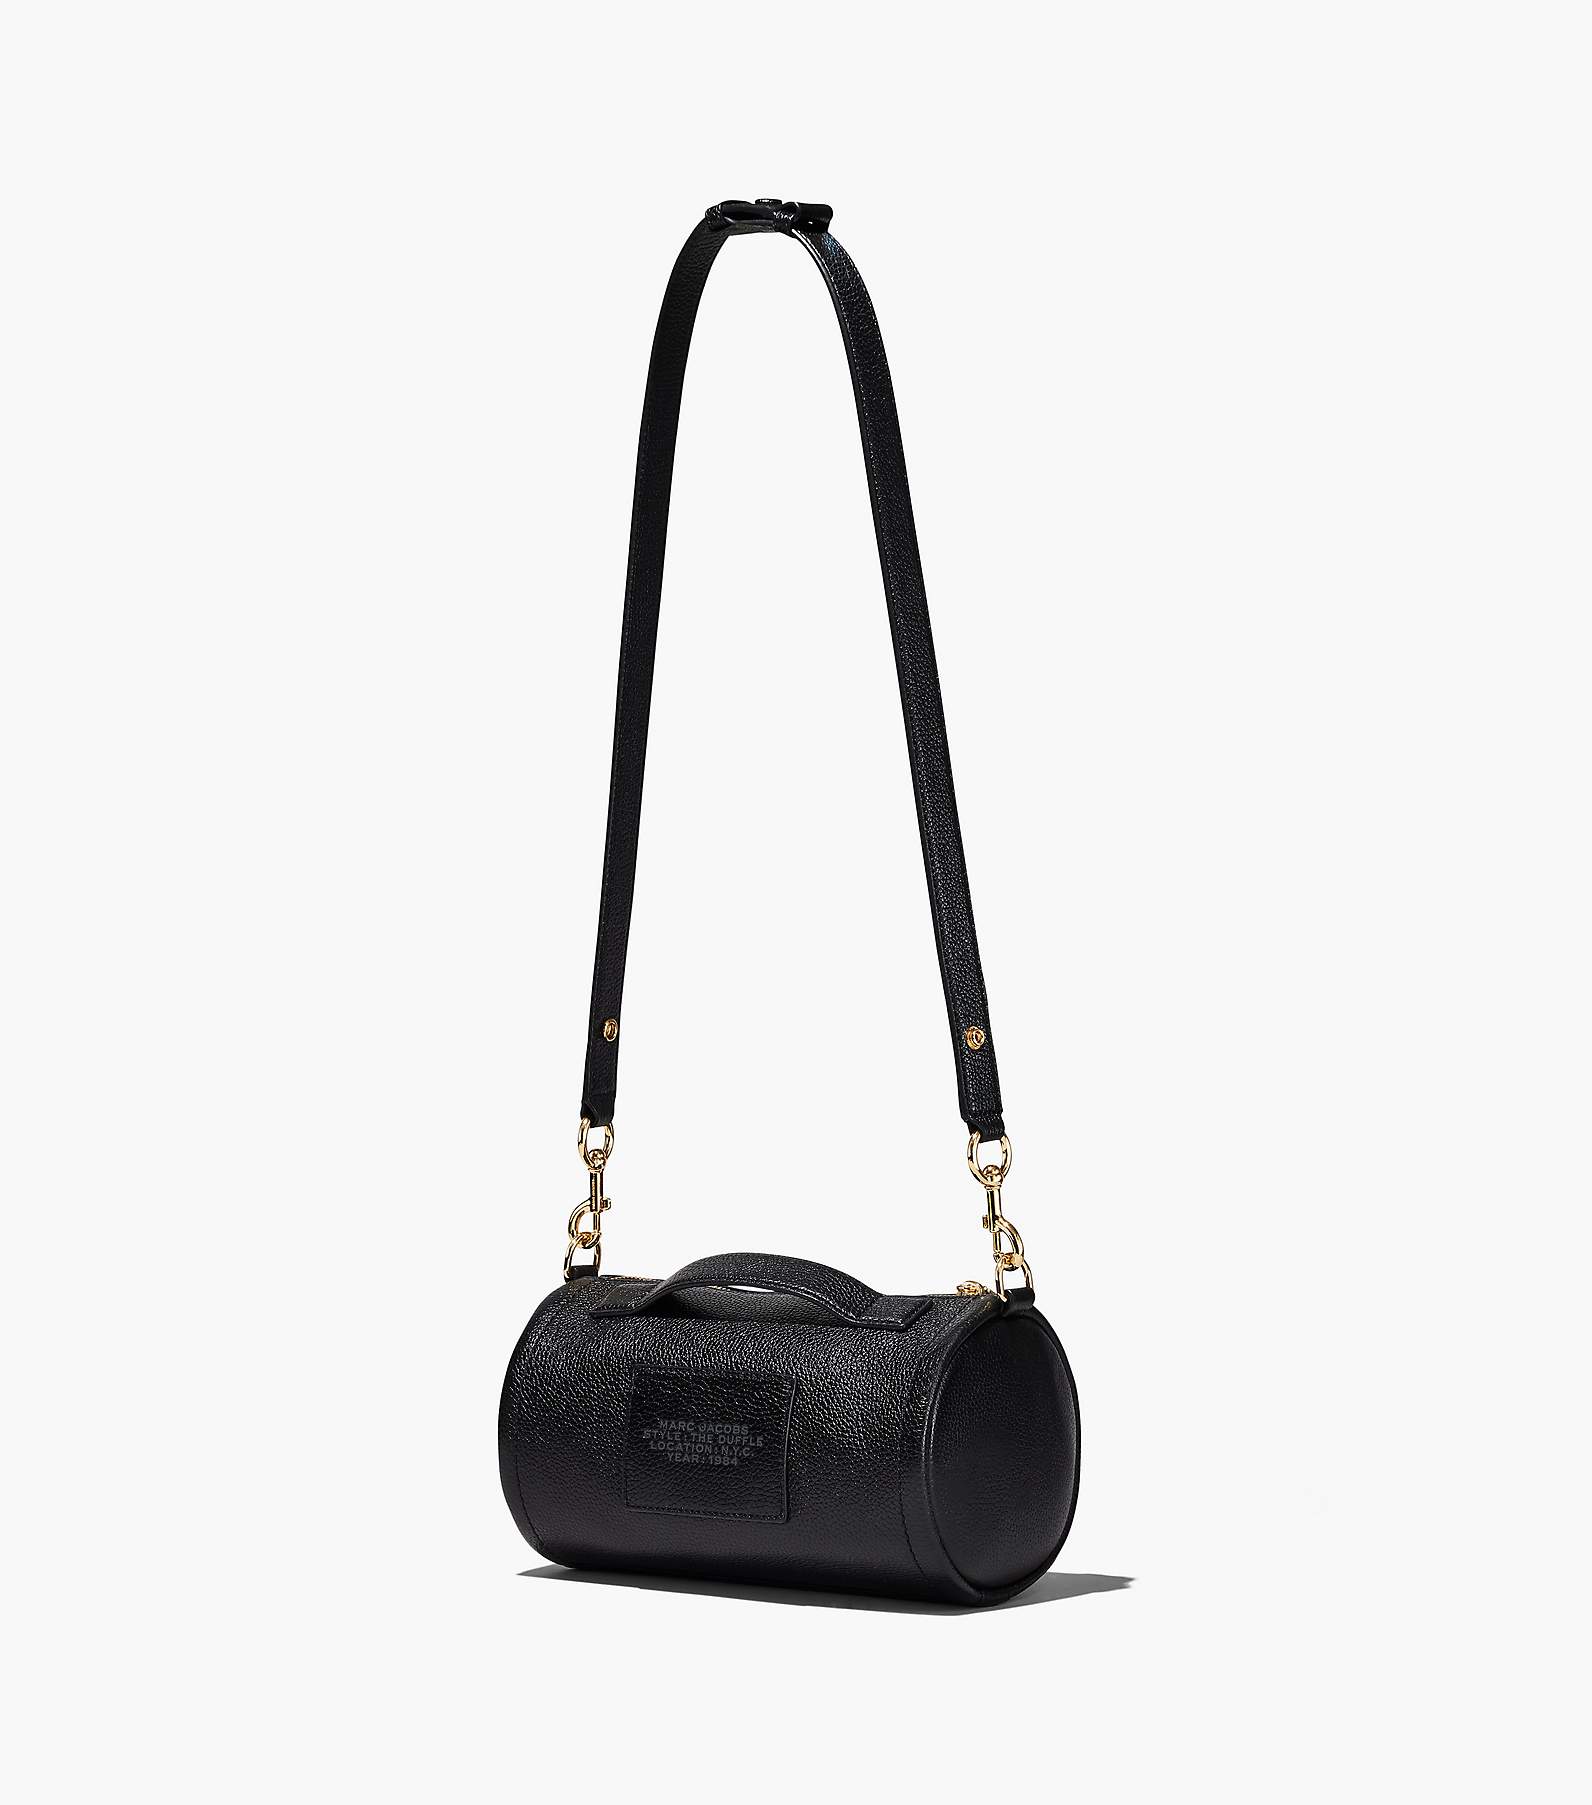 Marc by Marc Jacobs Black Leather Crossbody Bag Purse